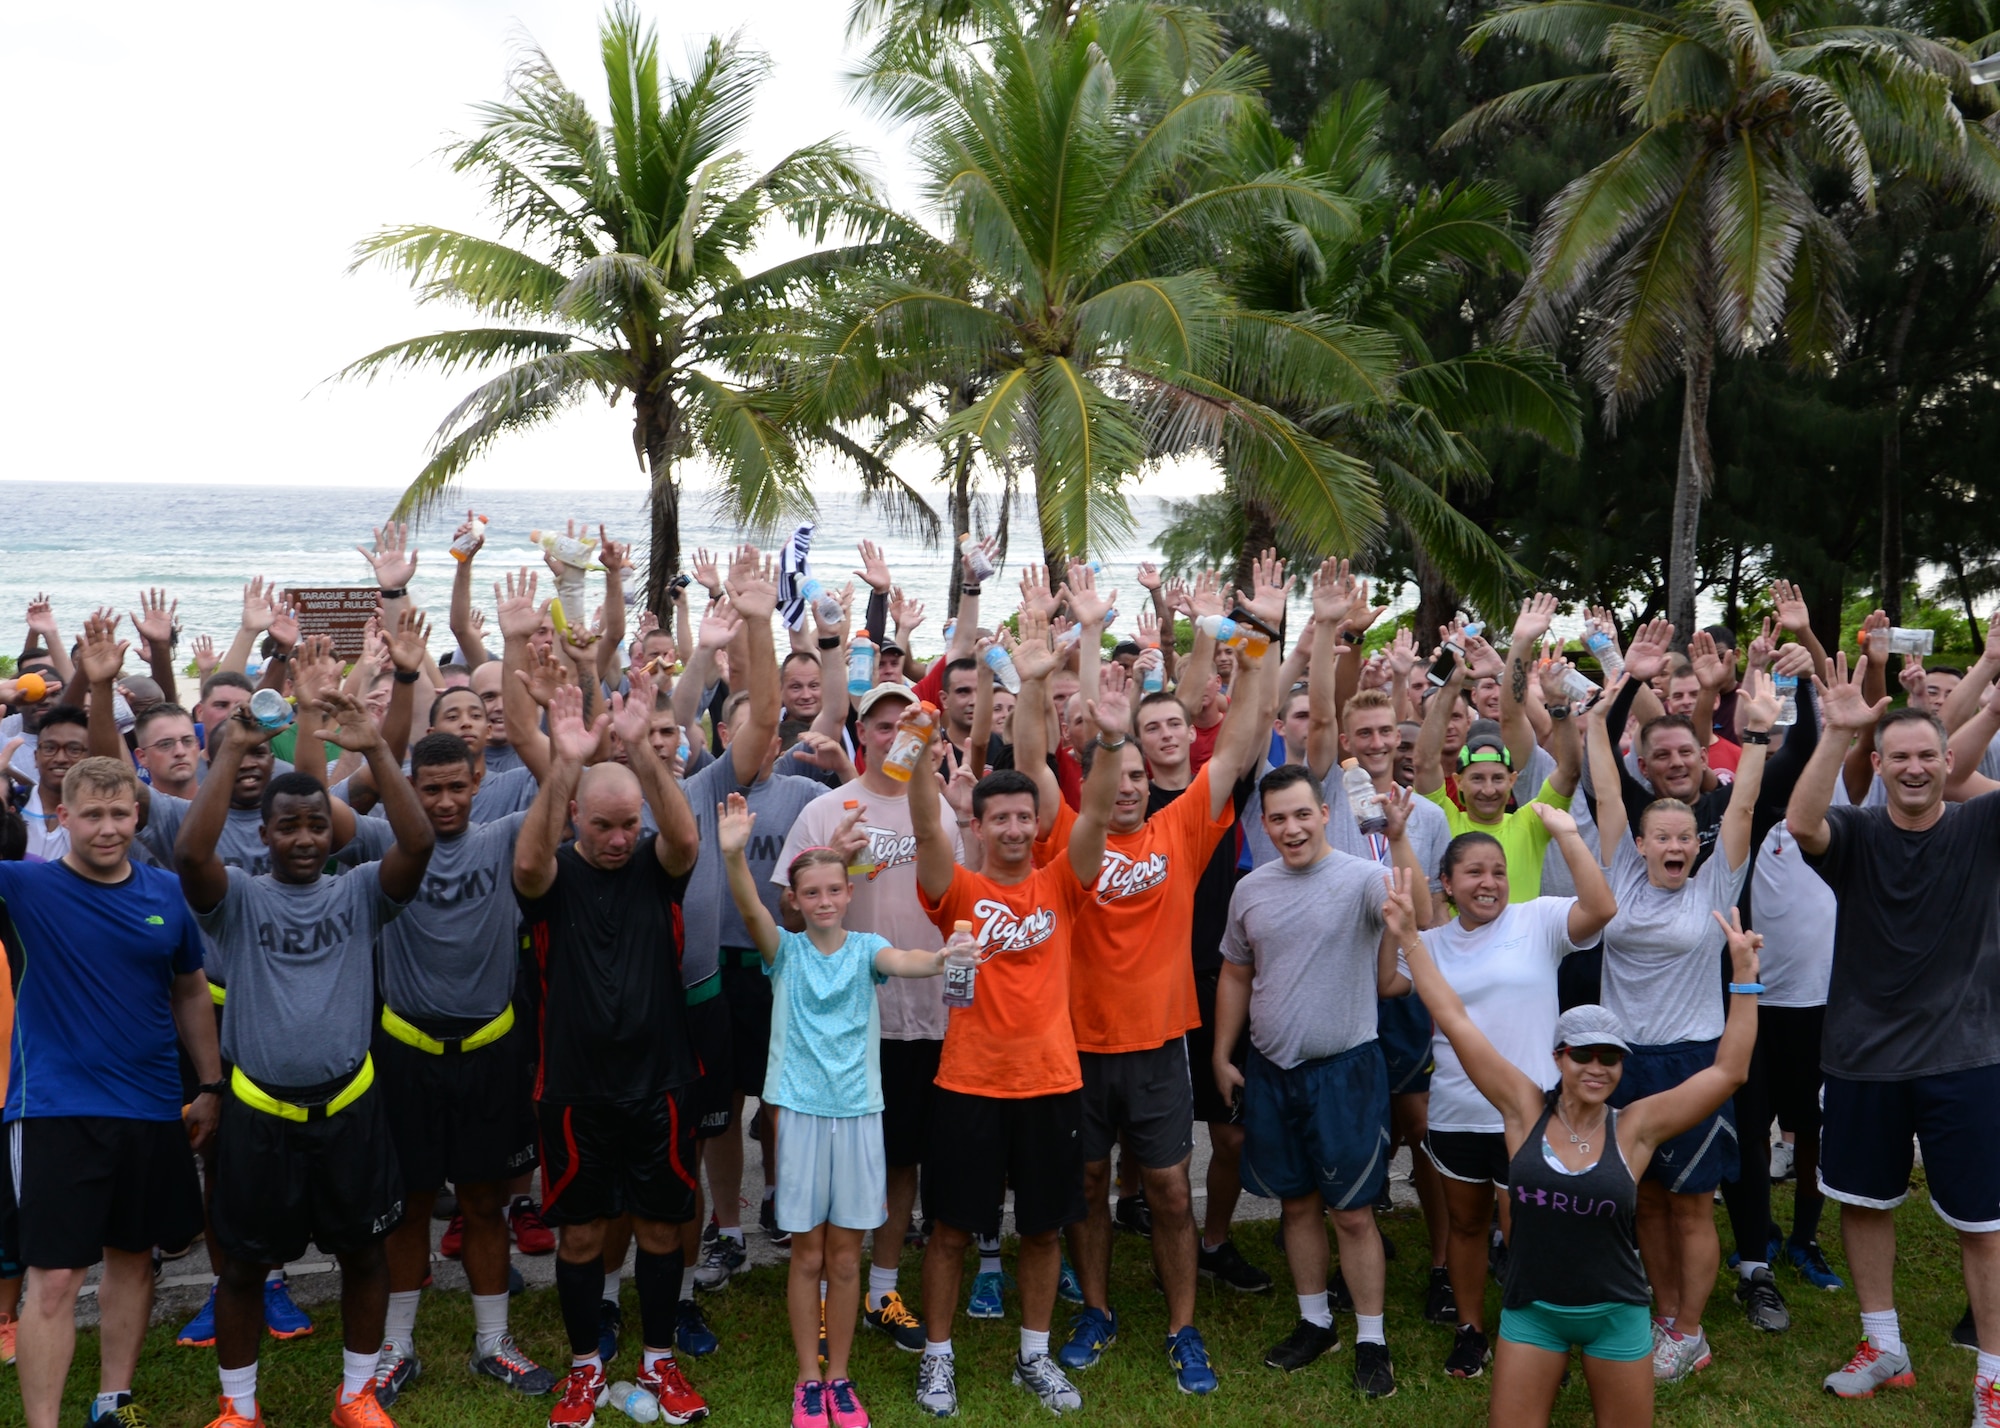 Participants in the Remembering our Heroes 5K cheer after completing the run at Tarague Beach Sep. 11, 2014, on Andersen Air Force Base, Guam. The run, which drew approximately 200 participants, was hosted by the Coral Reef Fitness Center and served as a tribute to the 9/11 tragedy that occurred Sept 11, 2001 in New York City and Washington D.C. when two airplanes were flown into the World Trade Center and Pentagon resulting in over 3,000 deaths including more than 400 police officers and firefighters. (U.S. Air Force photo by Senior Airman Cierra Presentado)